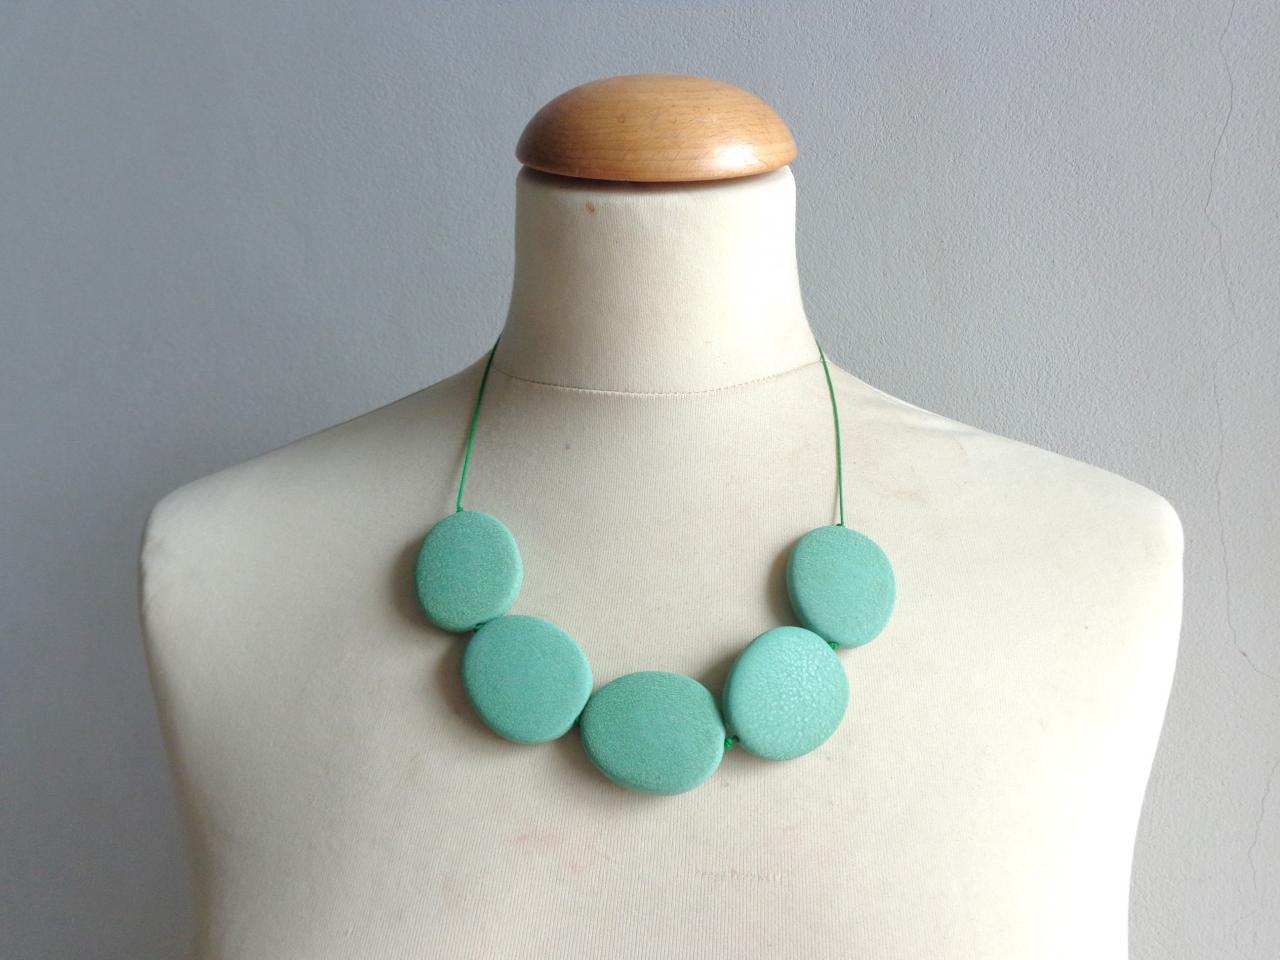 Giant Mint Green Pebble Statement Necklace